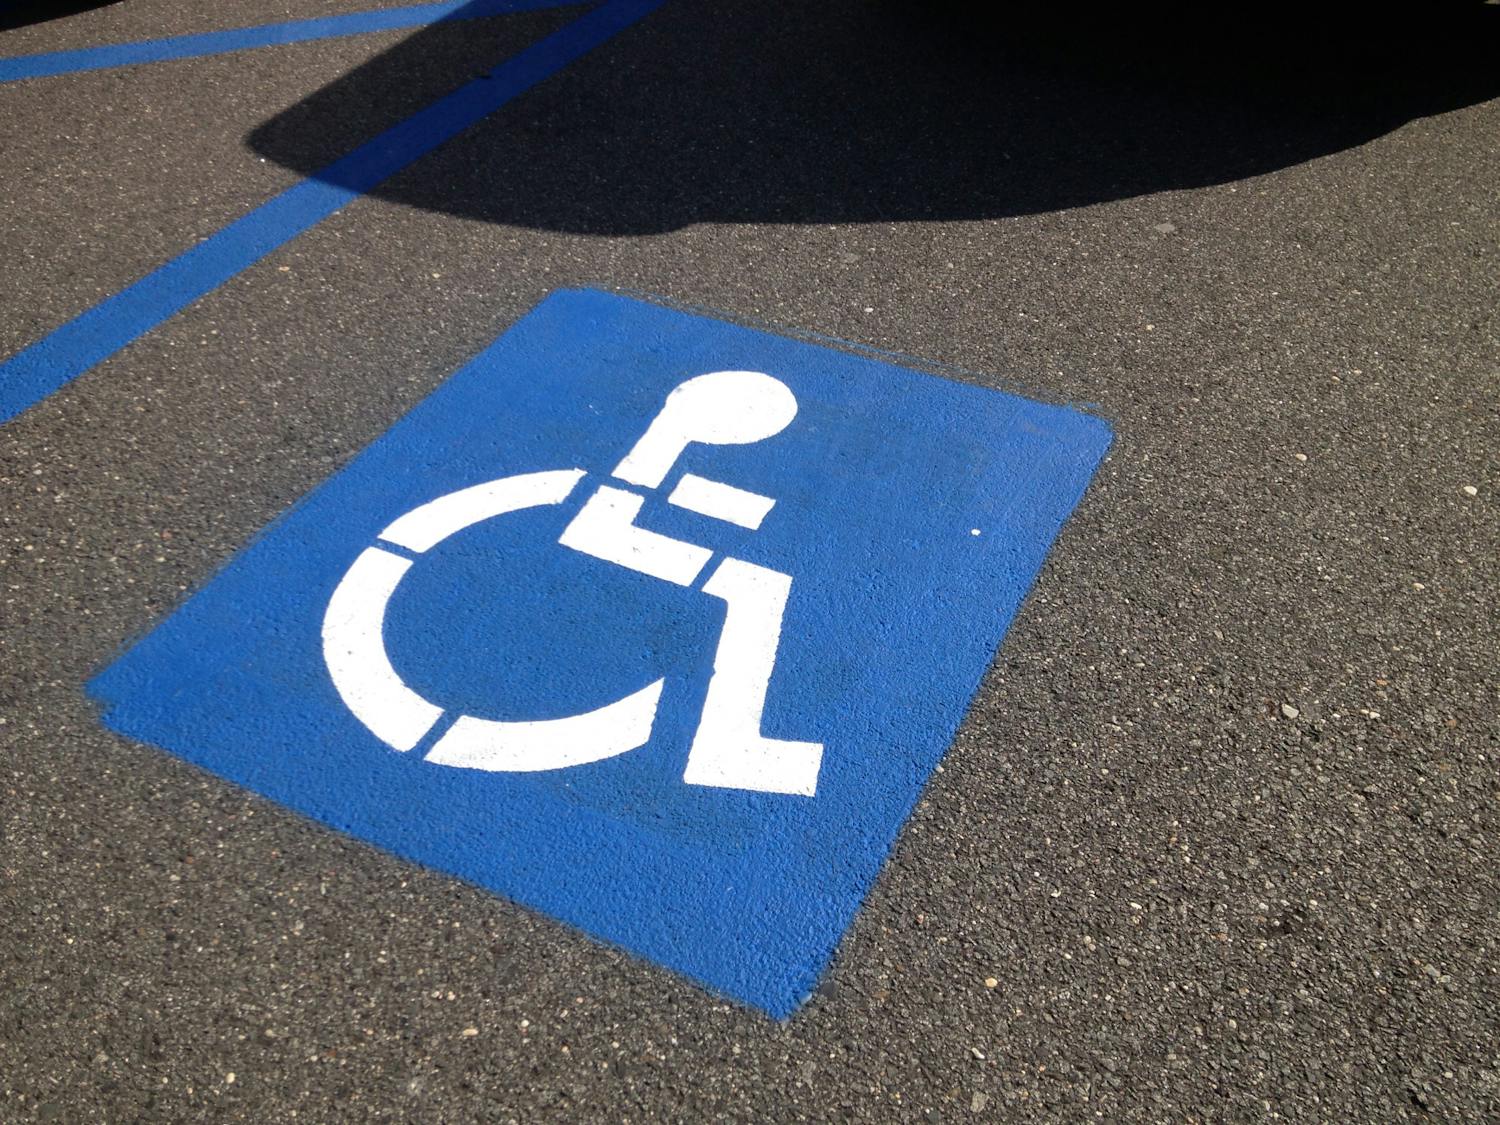 The College’s Accessibility Resource Center (ARC) gives students with disabilities access to a broad range of accommodations for mental and physical disabilities, such as time extensions on assignments and housing accommodations. (Photo courtesy of Flickr/“Accessible Parking” by SmartSign/Aug. 16, 2013)